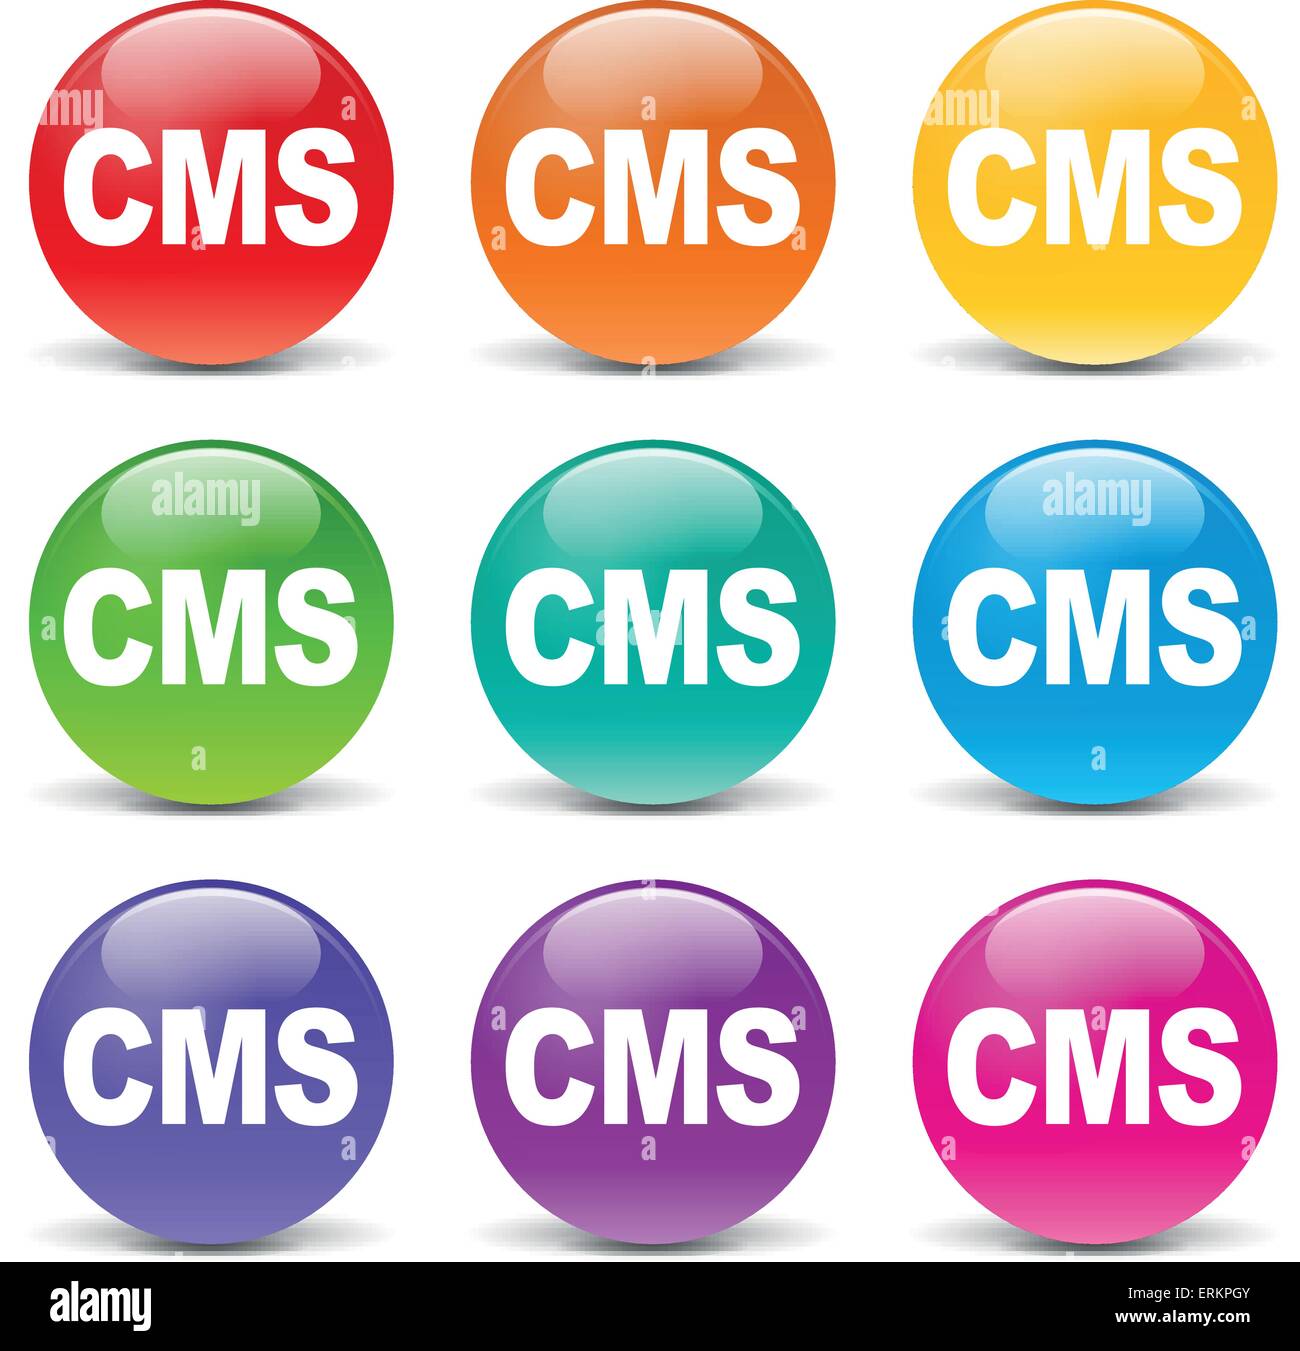 Vector illustration of colorful cms icons on white background Stock Vector